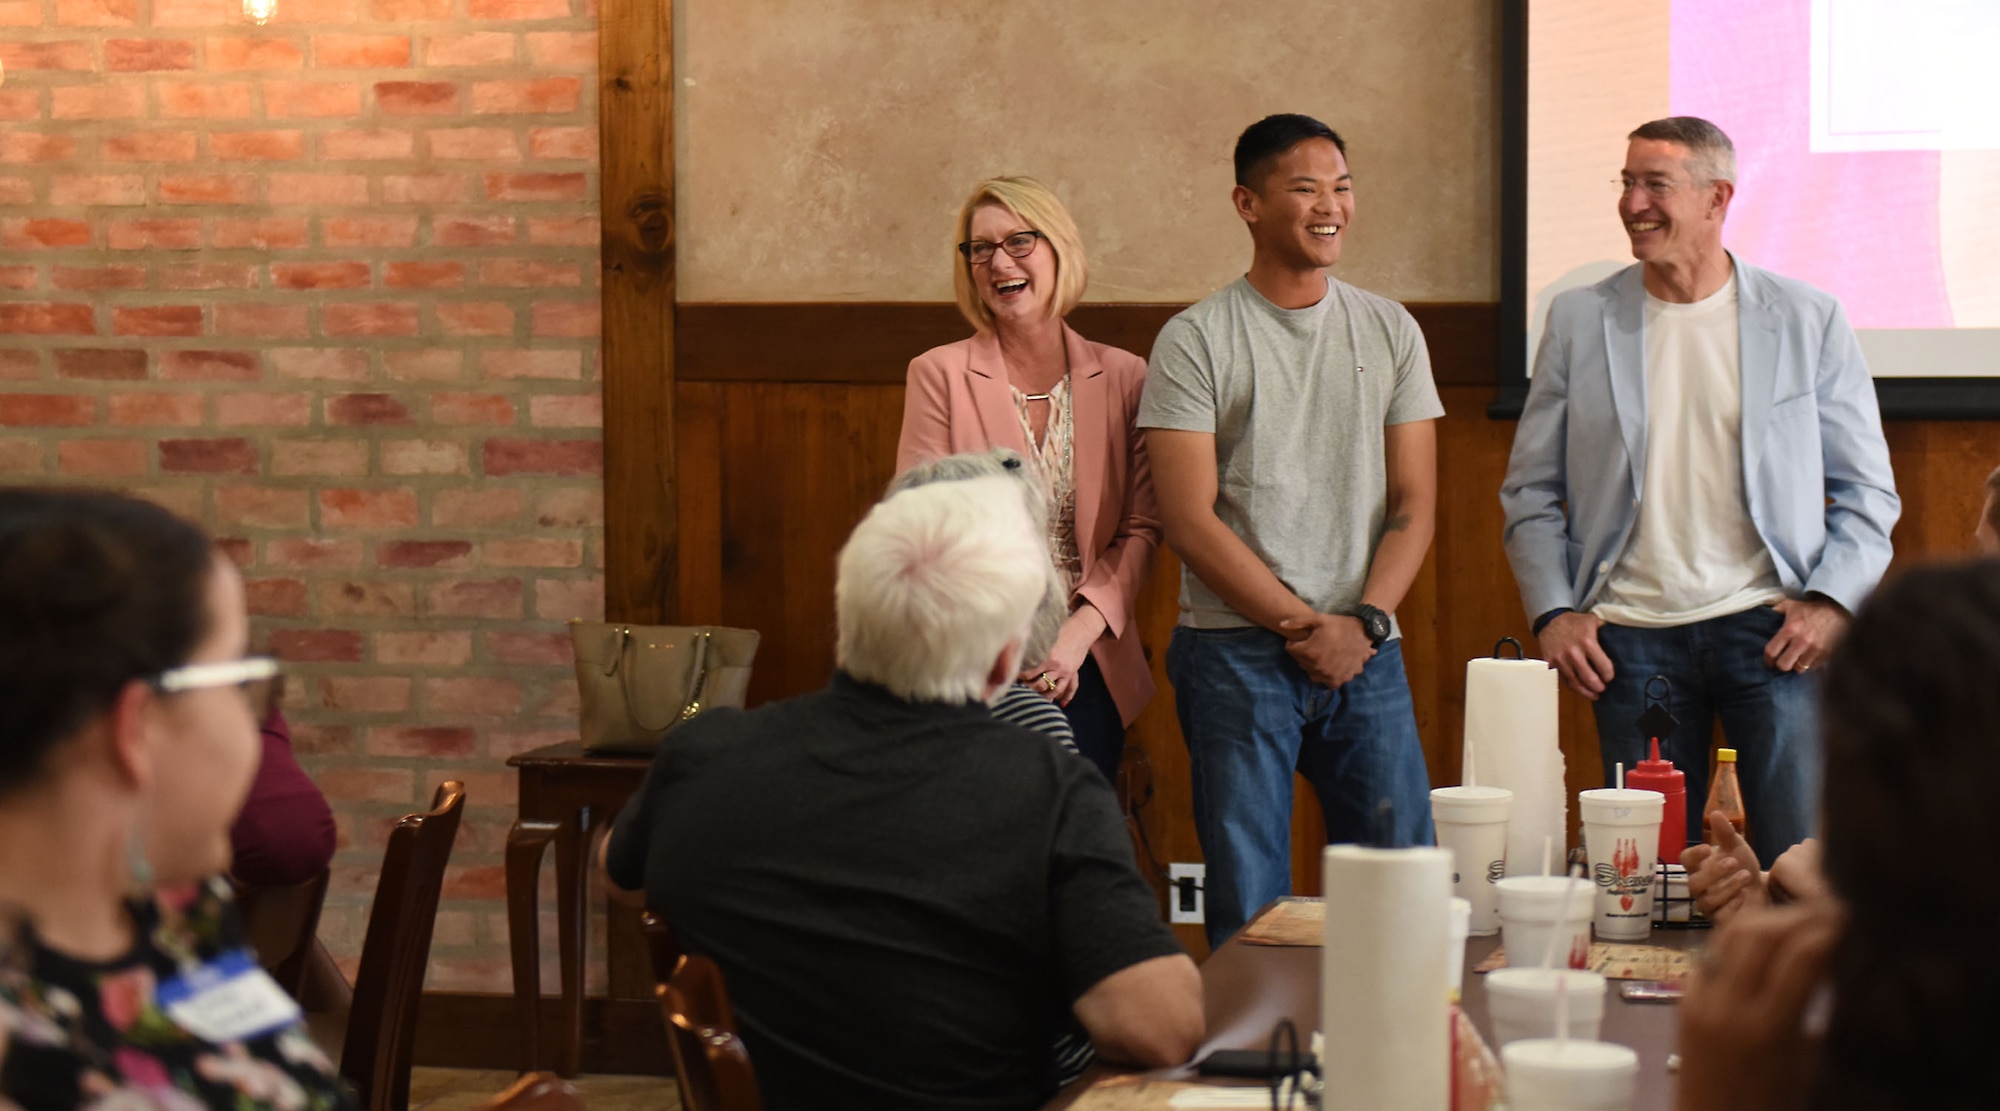 Airman 1st Class Nino Garcia, firefighter assigned to the 2nd Civil Engineer Squadron Fire Station 3, speaks about his Roots for Boots experience with his host family, Michael and Debbie Williams, at Shane’s Seafood and BBQ in Bossier City, La., April 30, 2017. The Williams and Garcia have been involved with the program since it started in 2016. (U.S. Air Force Photo/Airman 1st Class Sydney Bennett)